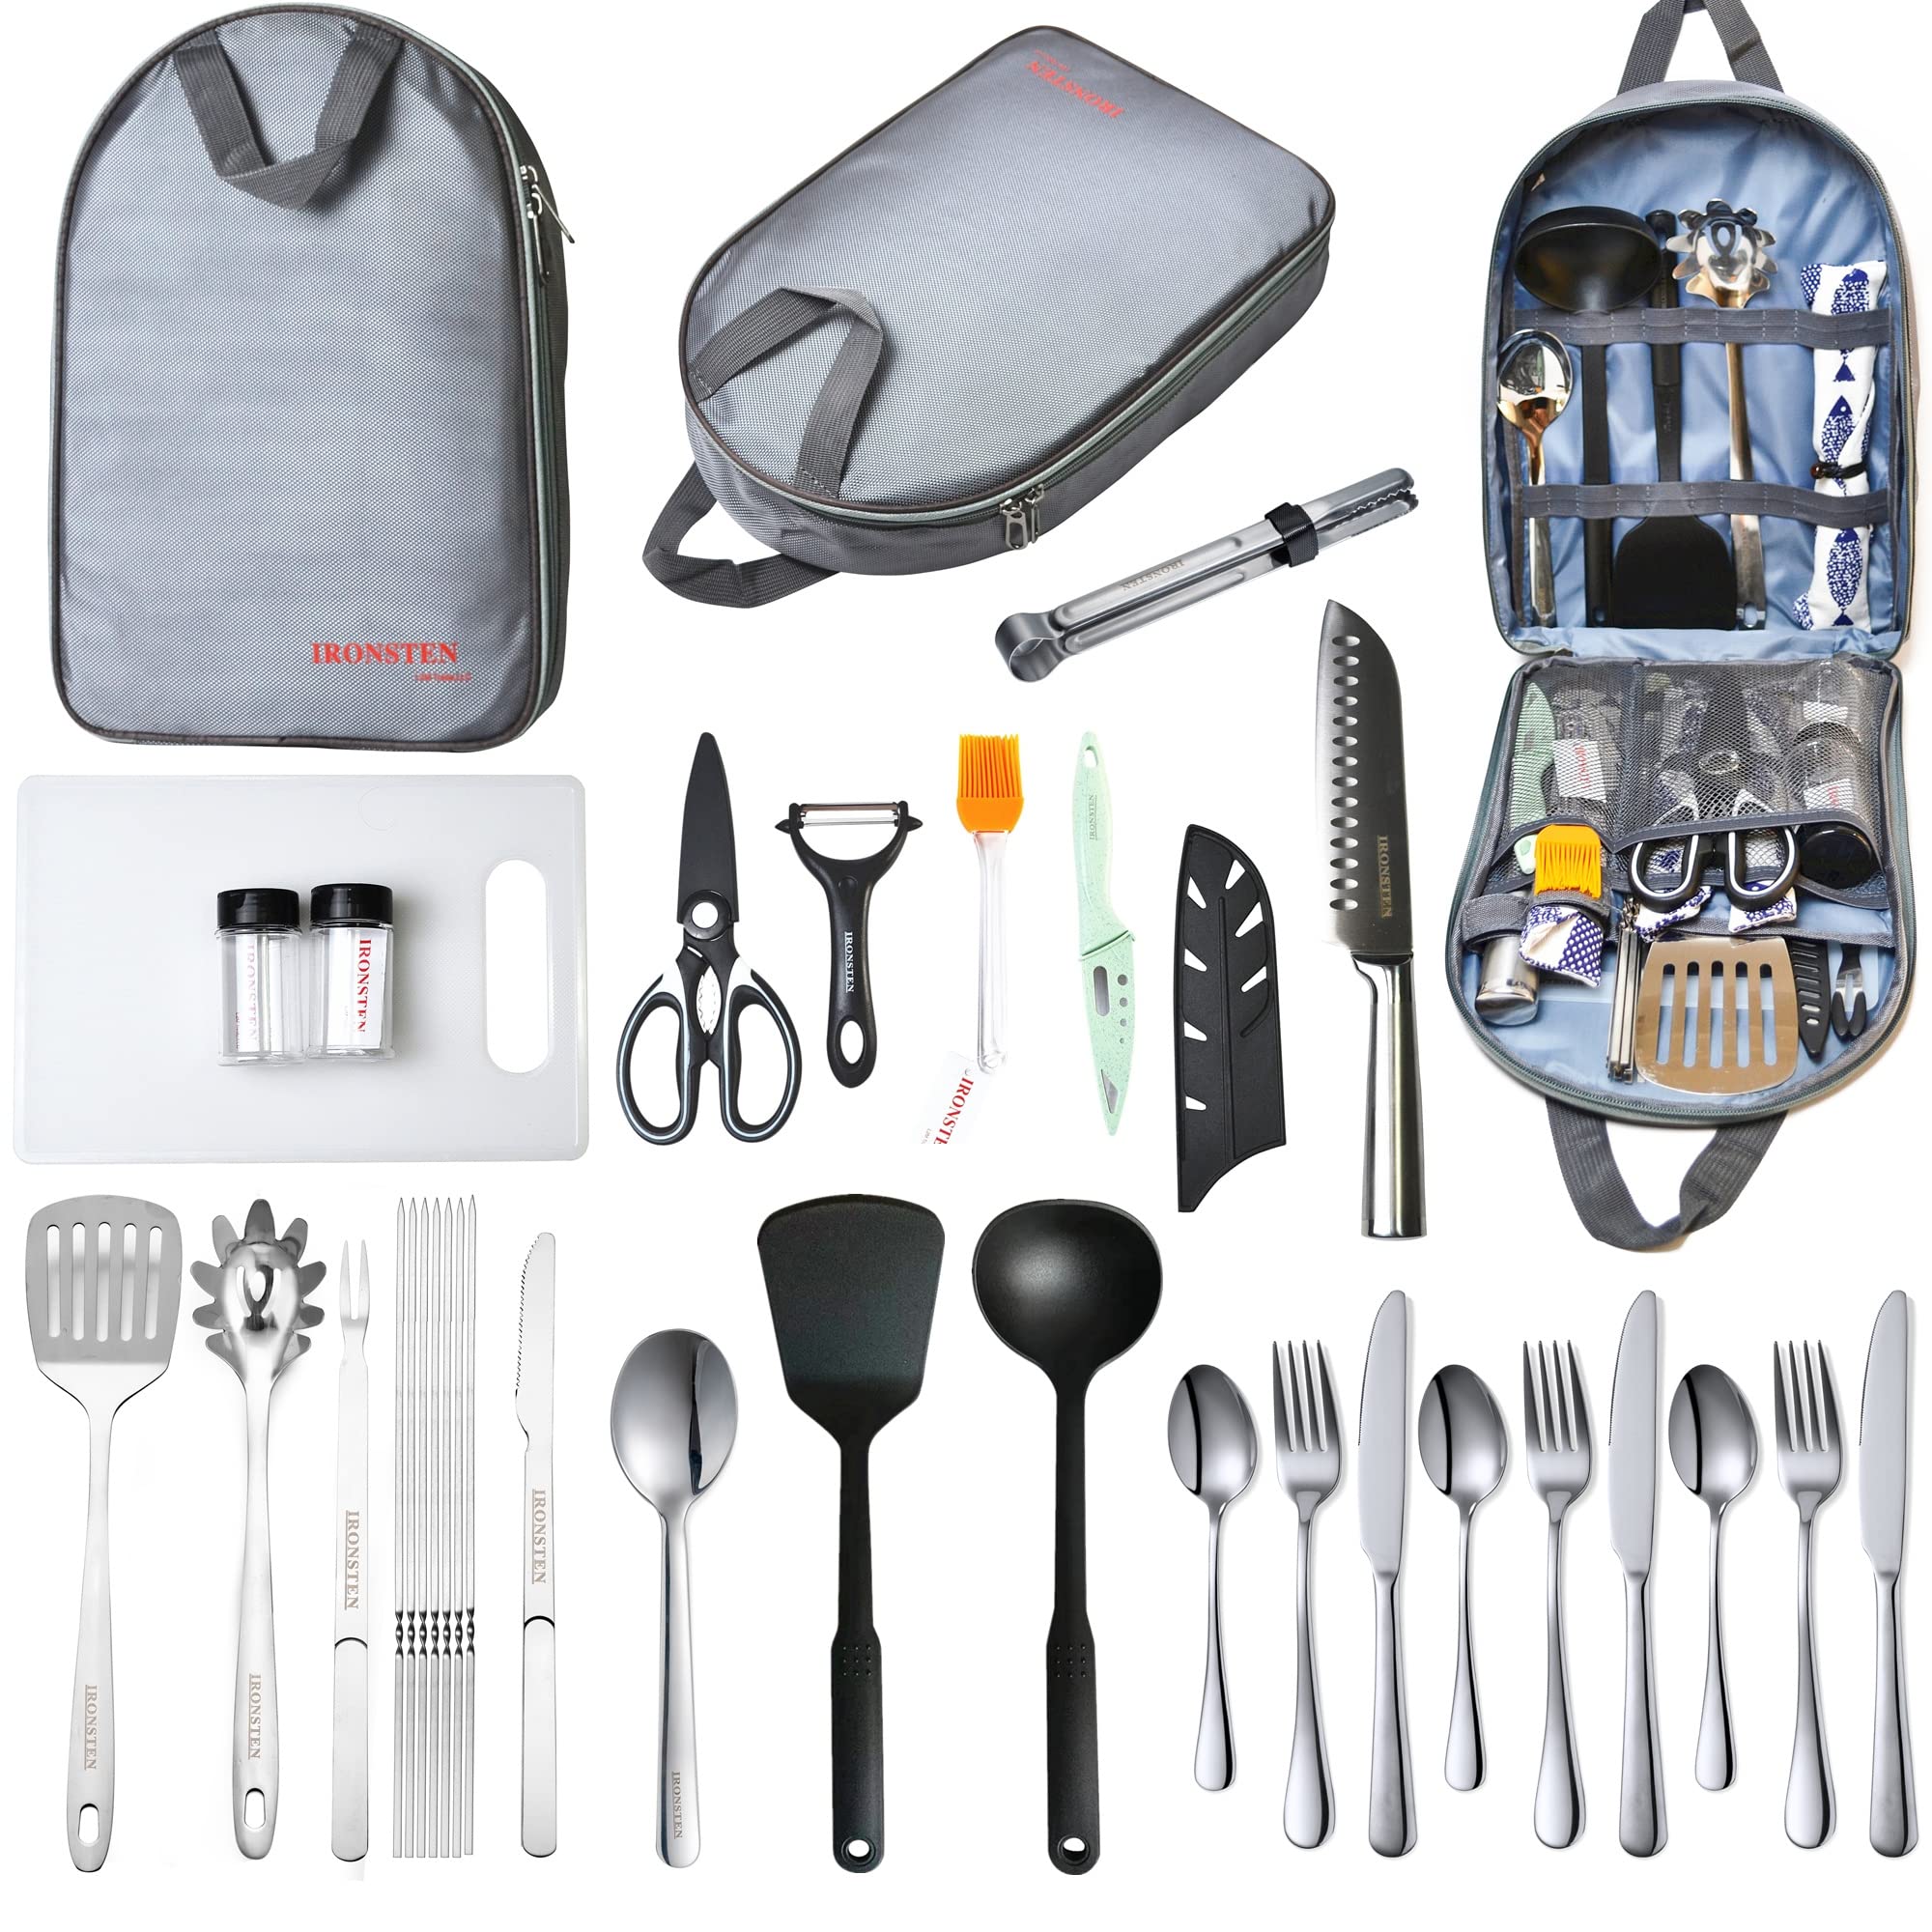 7pcs Camping Kitchen Utensil Set with Carrying Bag BBQ Beach Hiking Travel  Organizer Storage Pack Cook Gadgets Equipment Gear